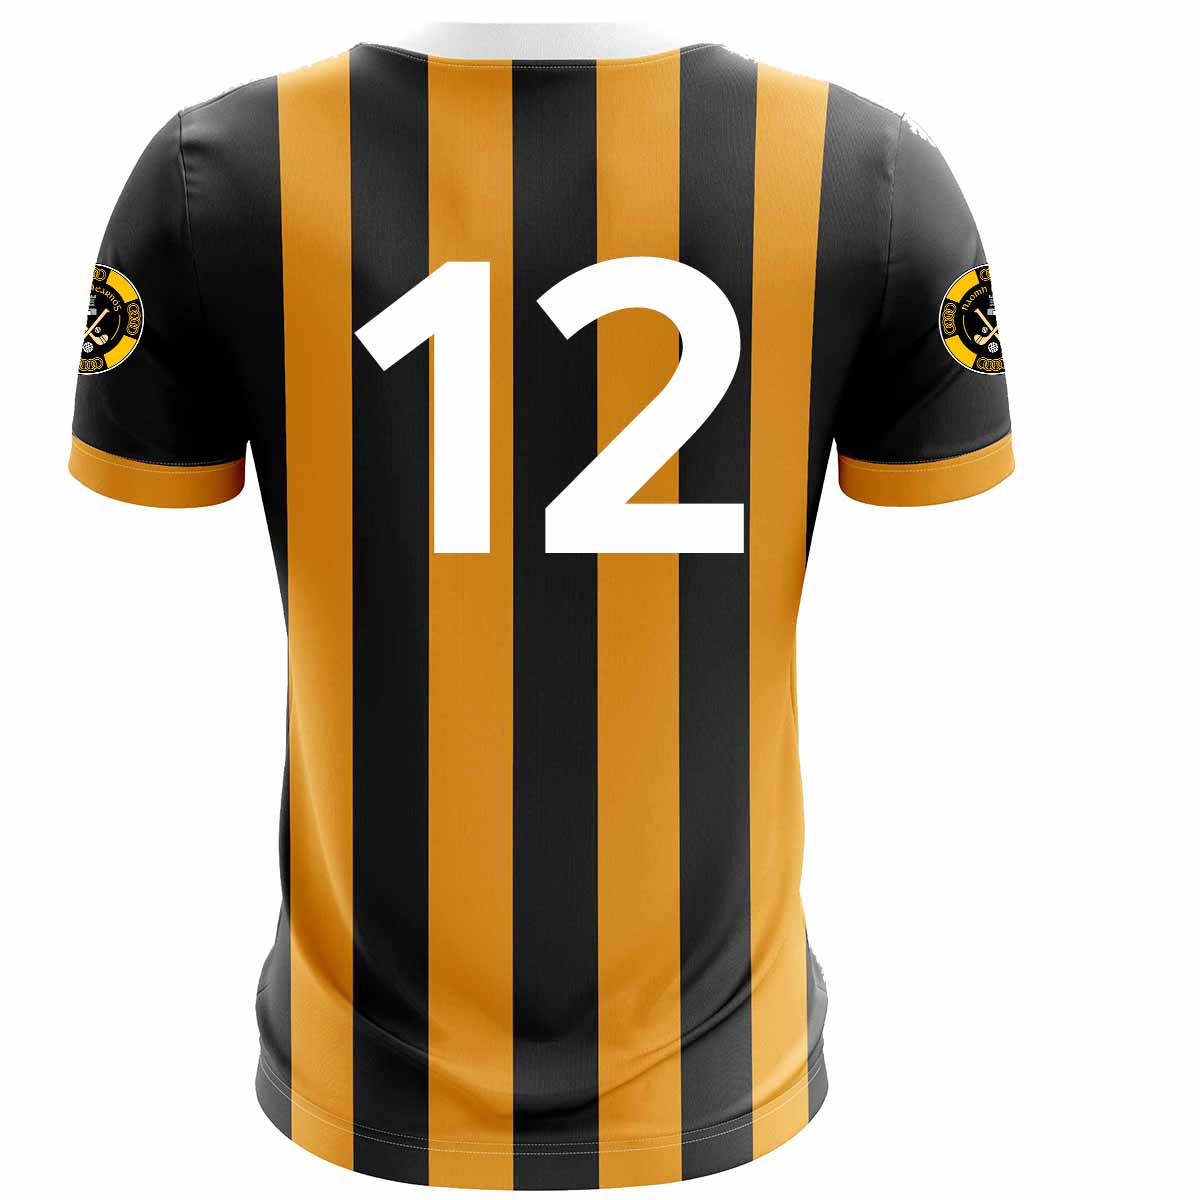 Mc Keever Naomh Mearnog CLG Numbered Playing Jersey - Youth - Black/Amber